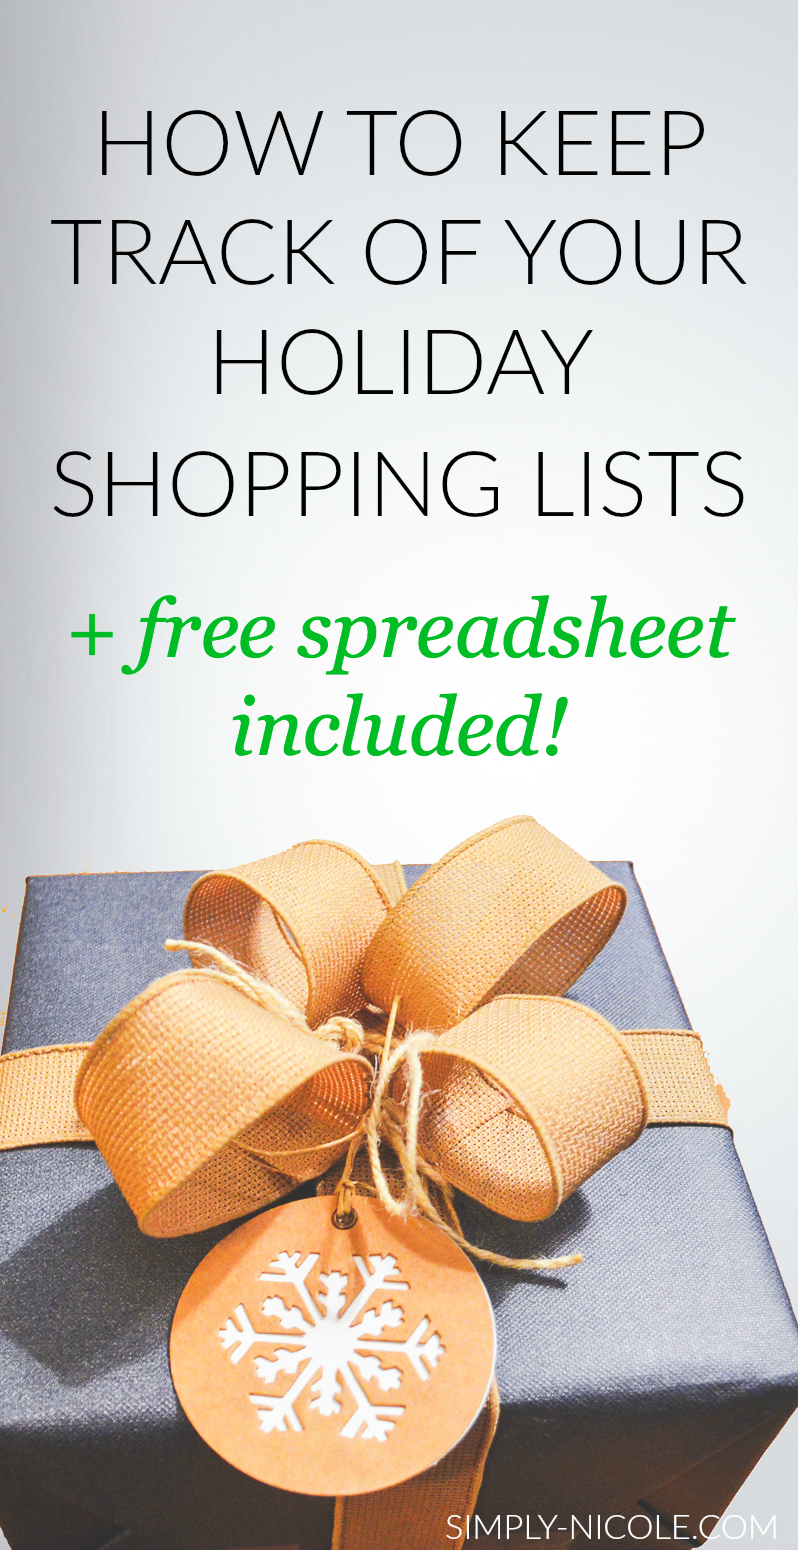 How to Keep Track of Your Holiday Shopping Lists plus free spreadsheet included